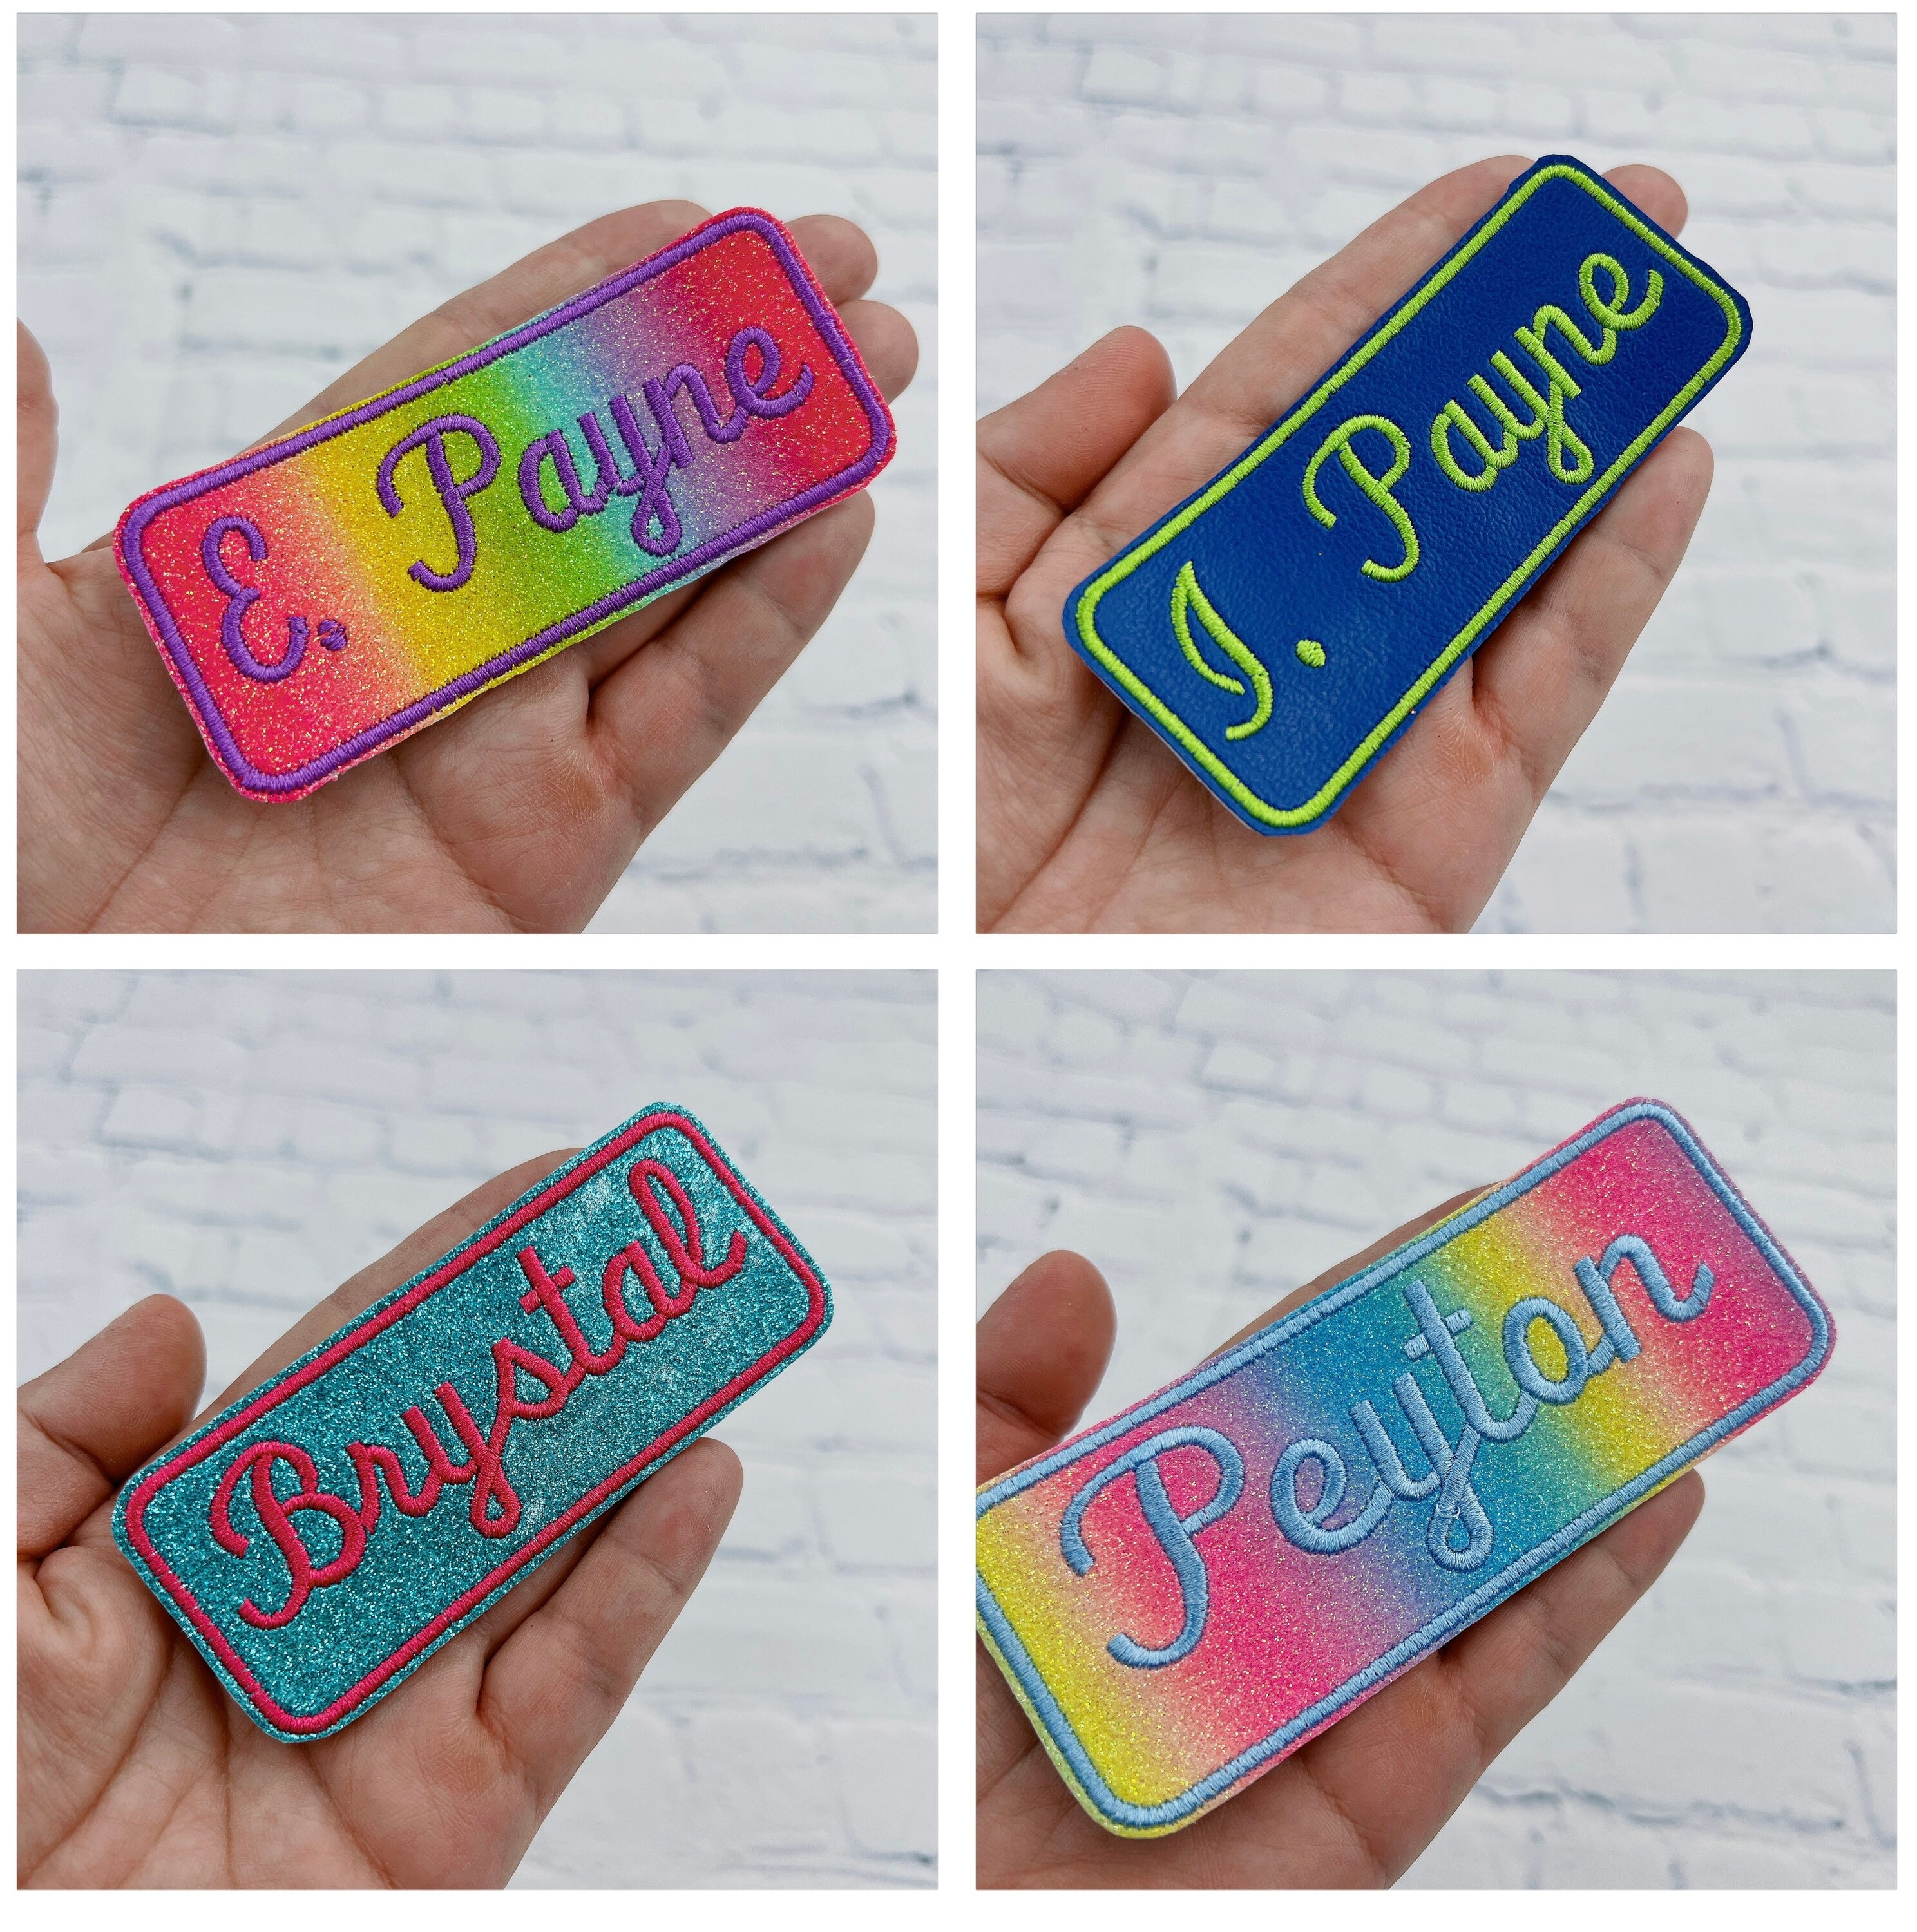 Personalized Name Embroidered Patches, Custom Name Patches Die Cut